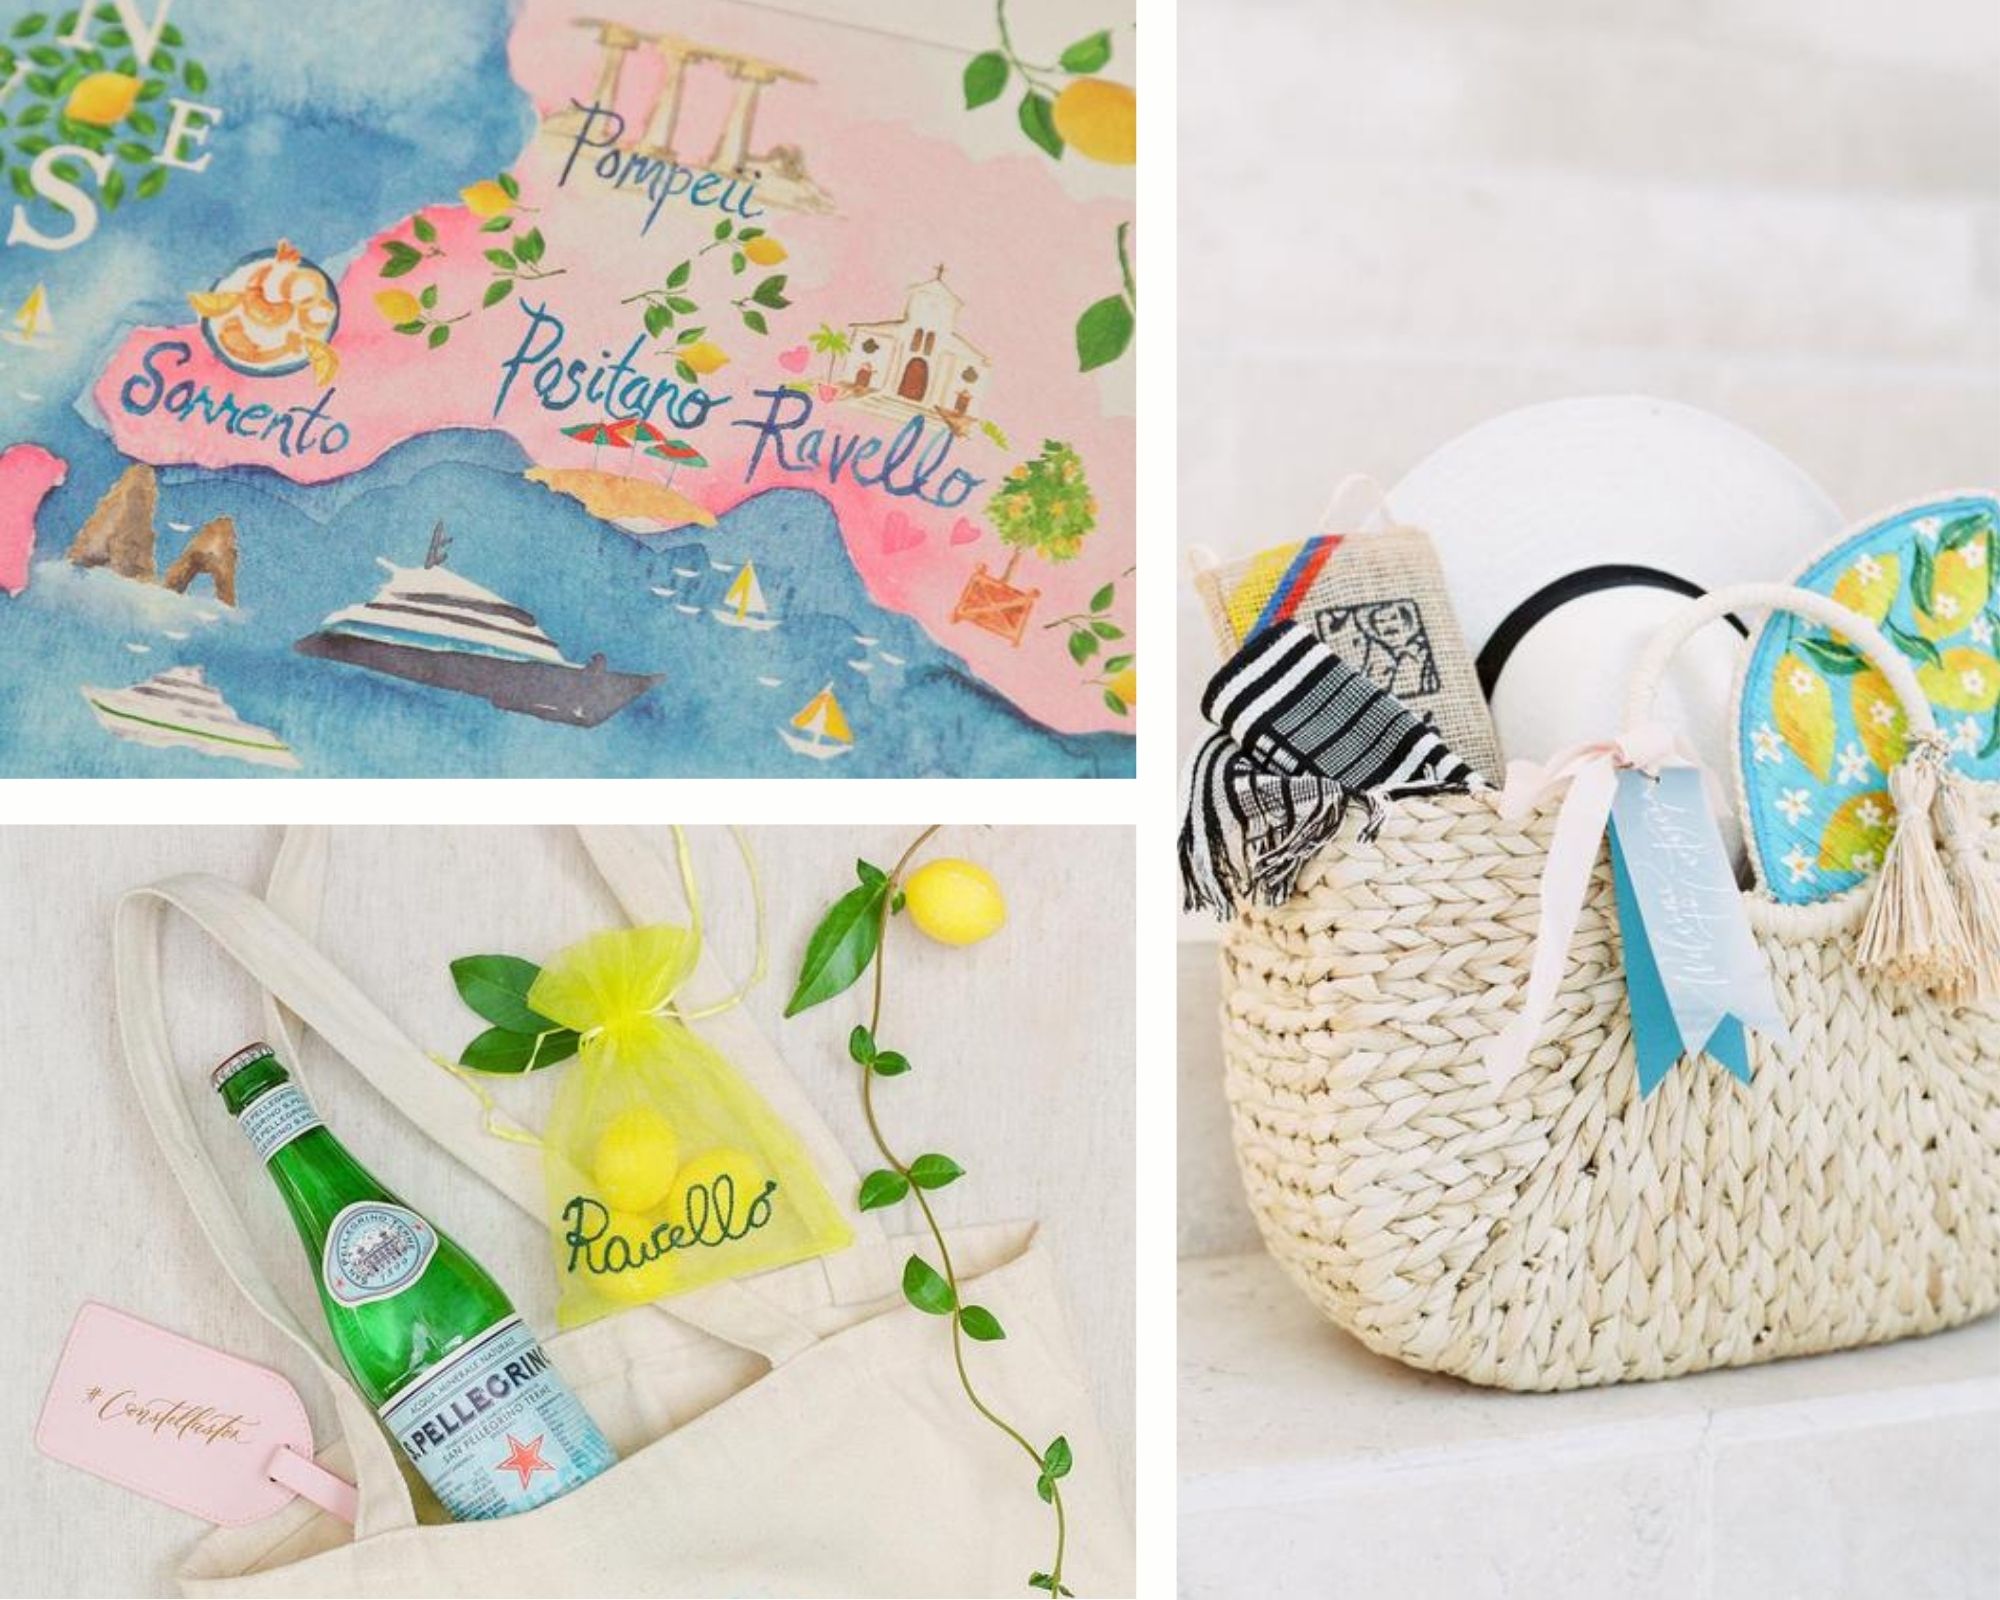 welcome box, typical products, wedding map